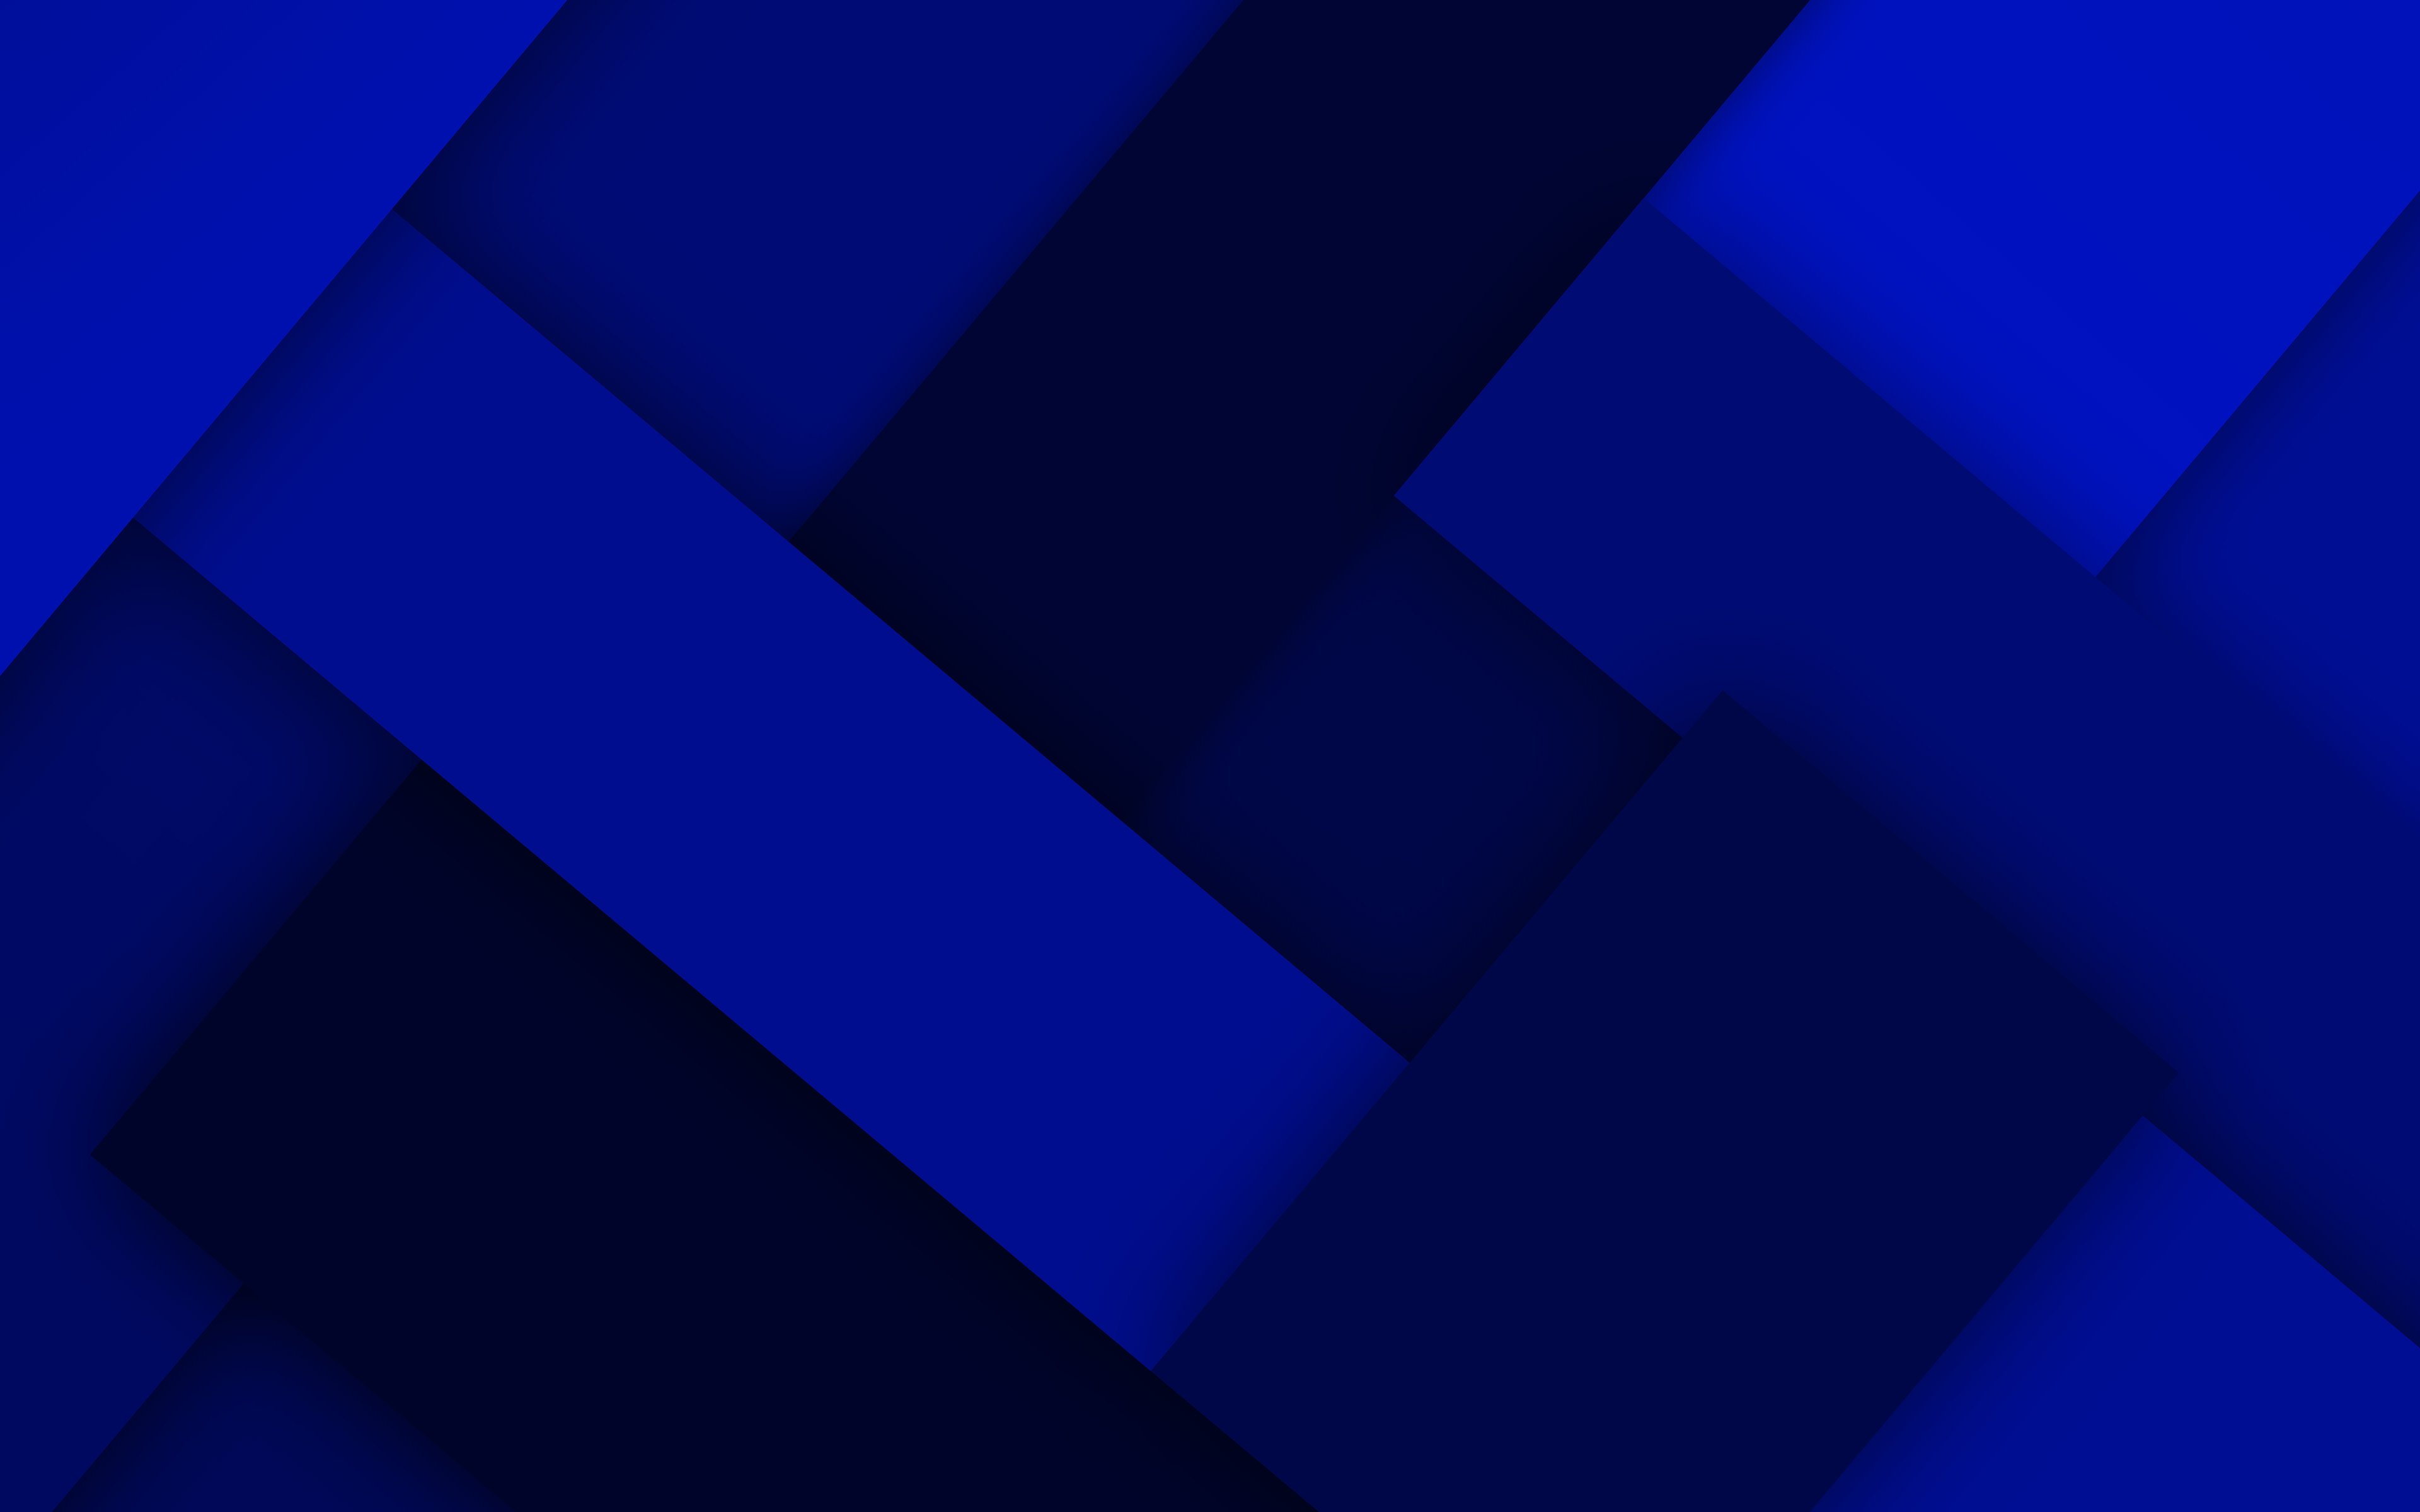 blue and white geometric shapes wallpaper